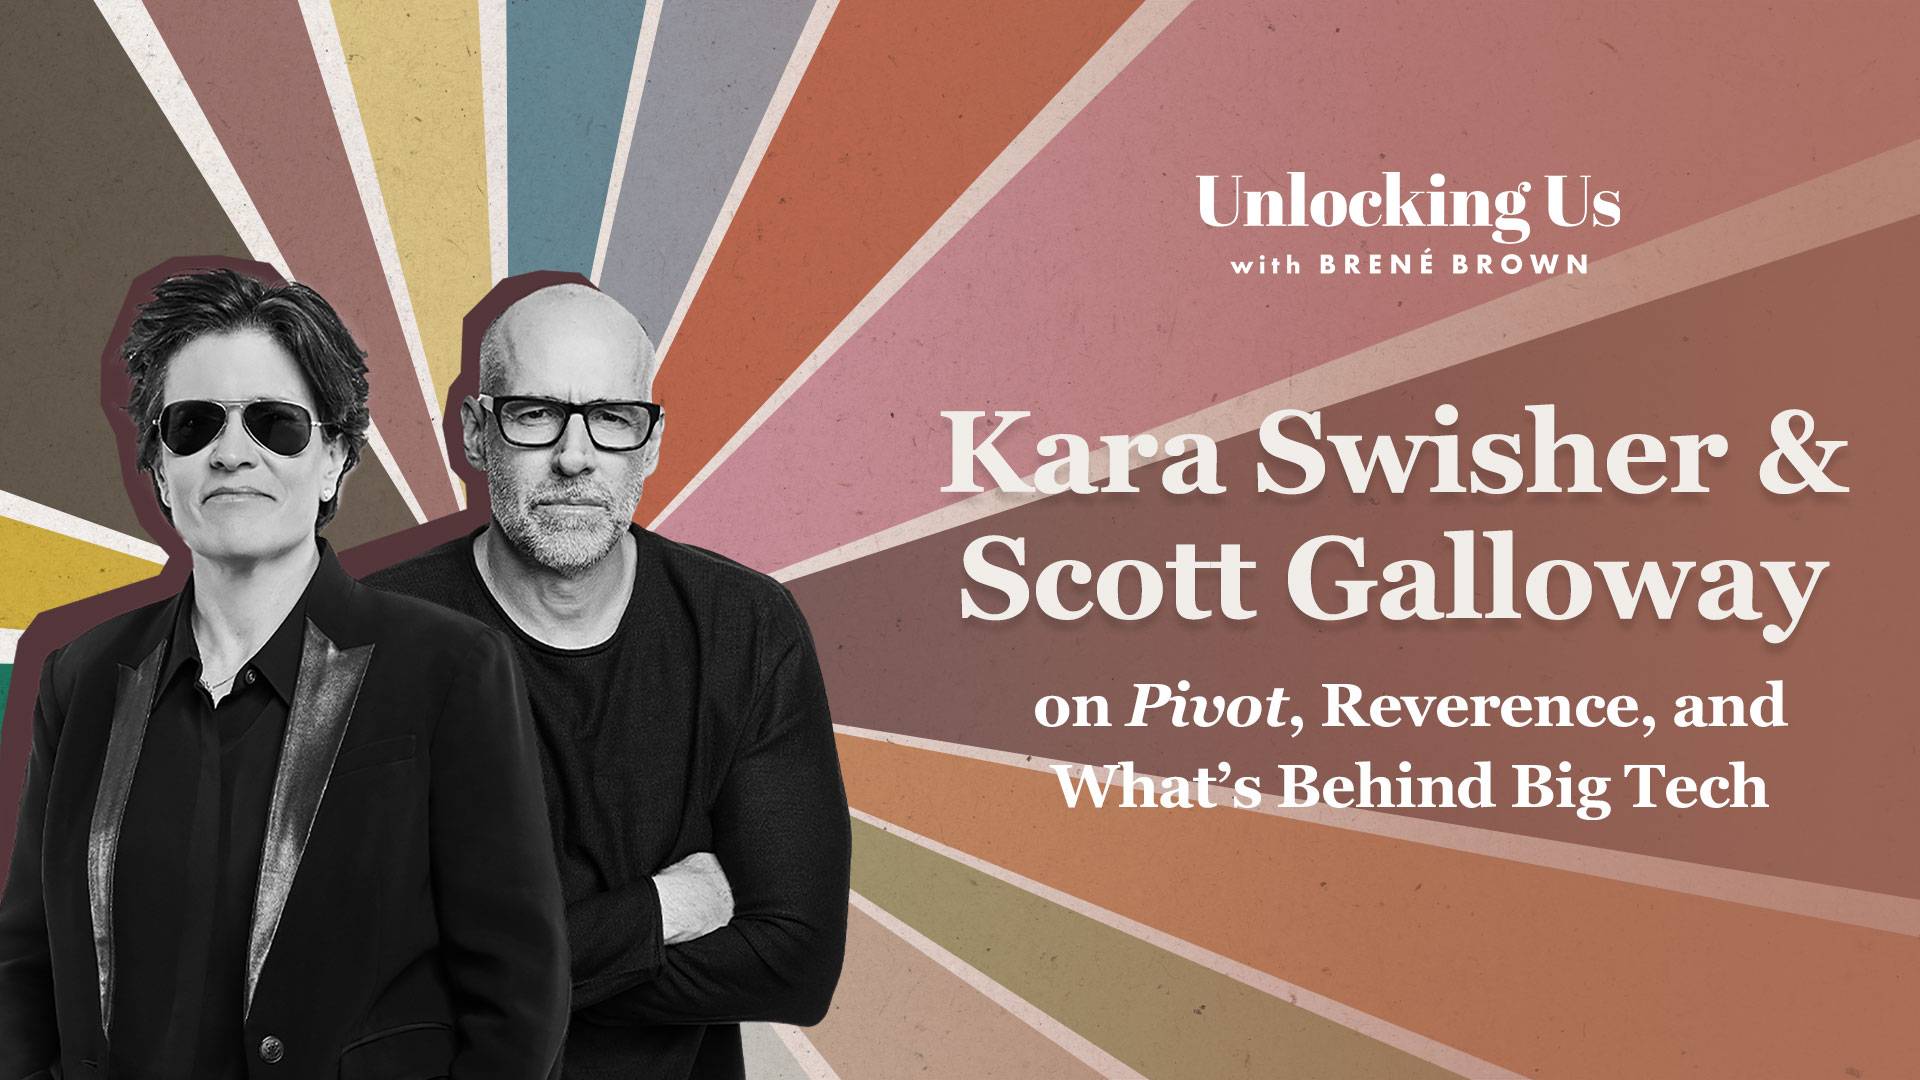 Kara Swisher and Scott Galloway from Pivot Podcast on the Unlocking Us Podcast with Brené Brown